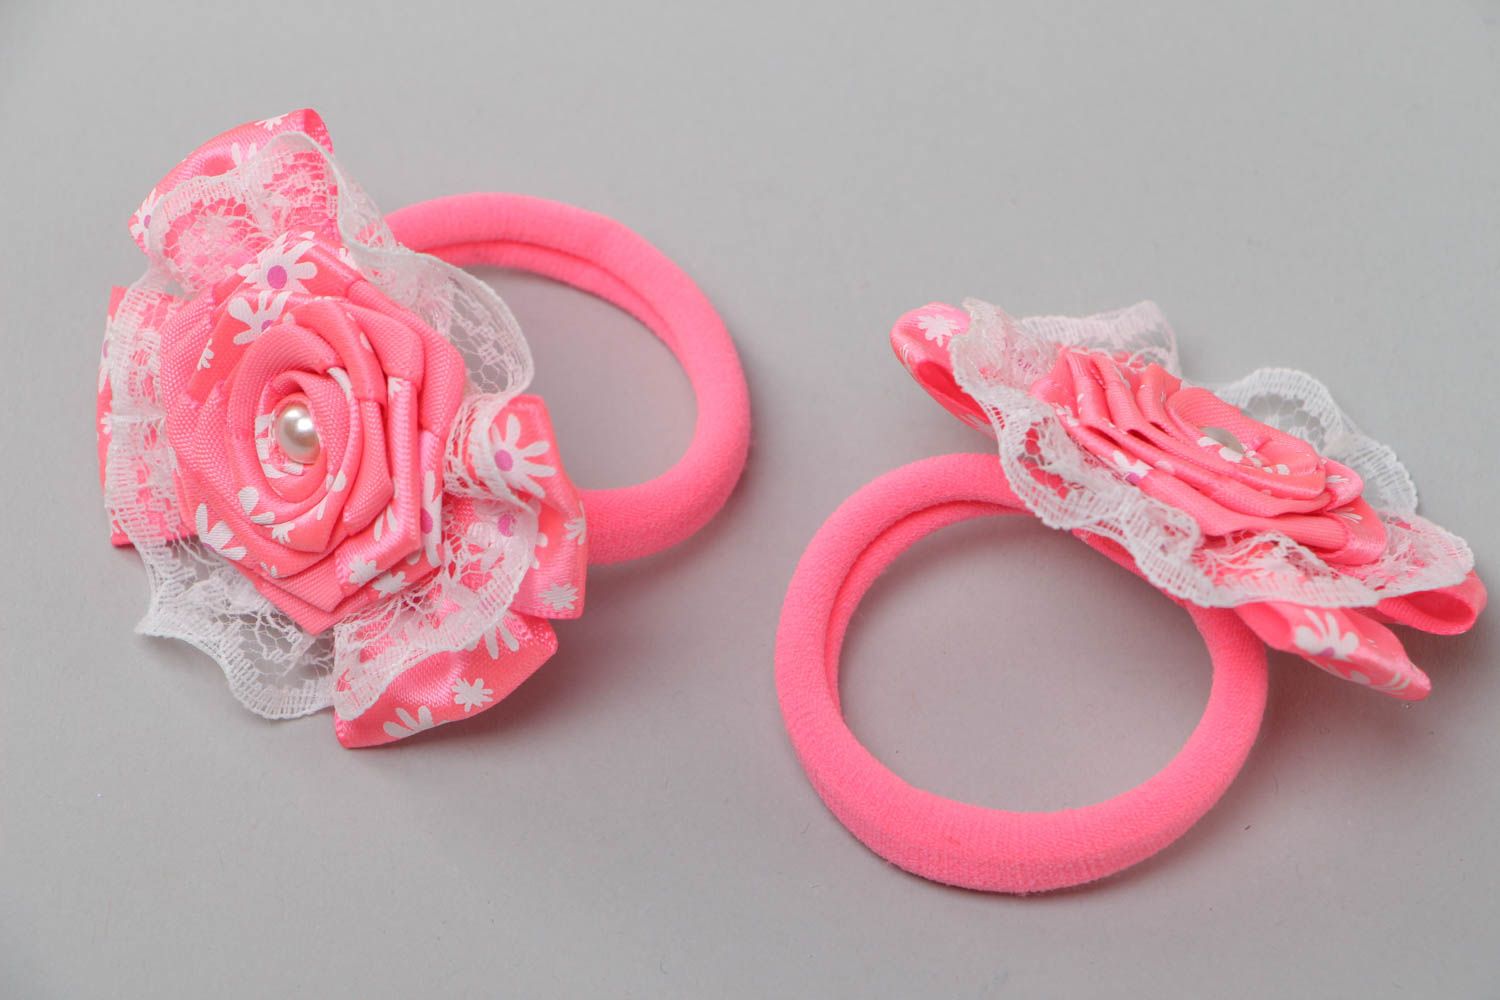 Handmade elastic hair bands with small tender pink flowers with lace 2 items photo 3